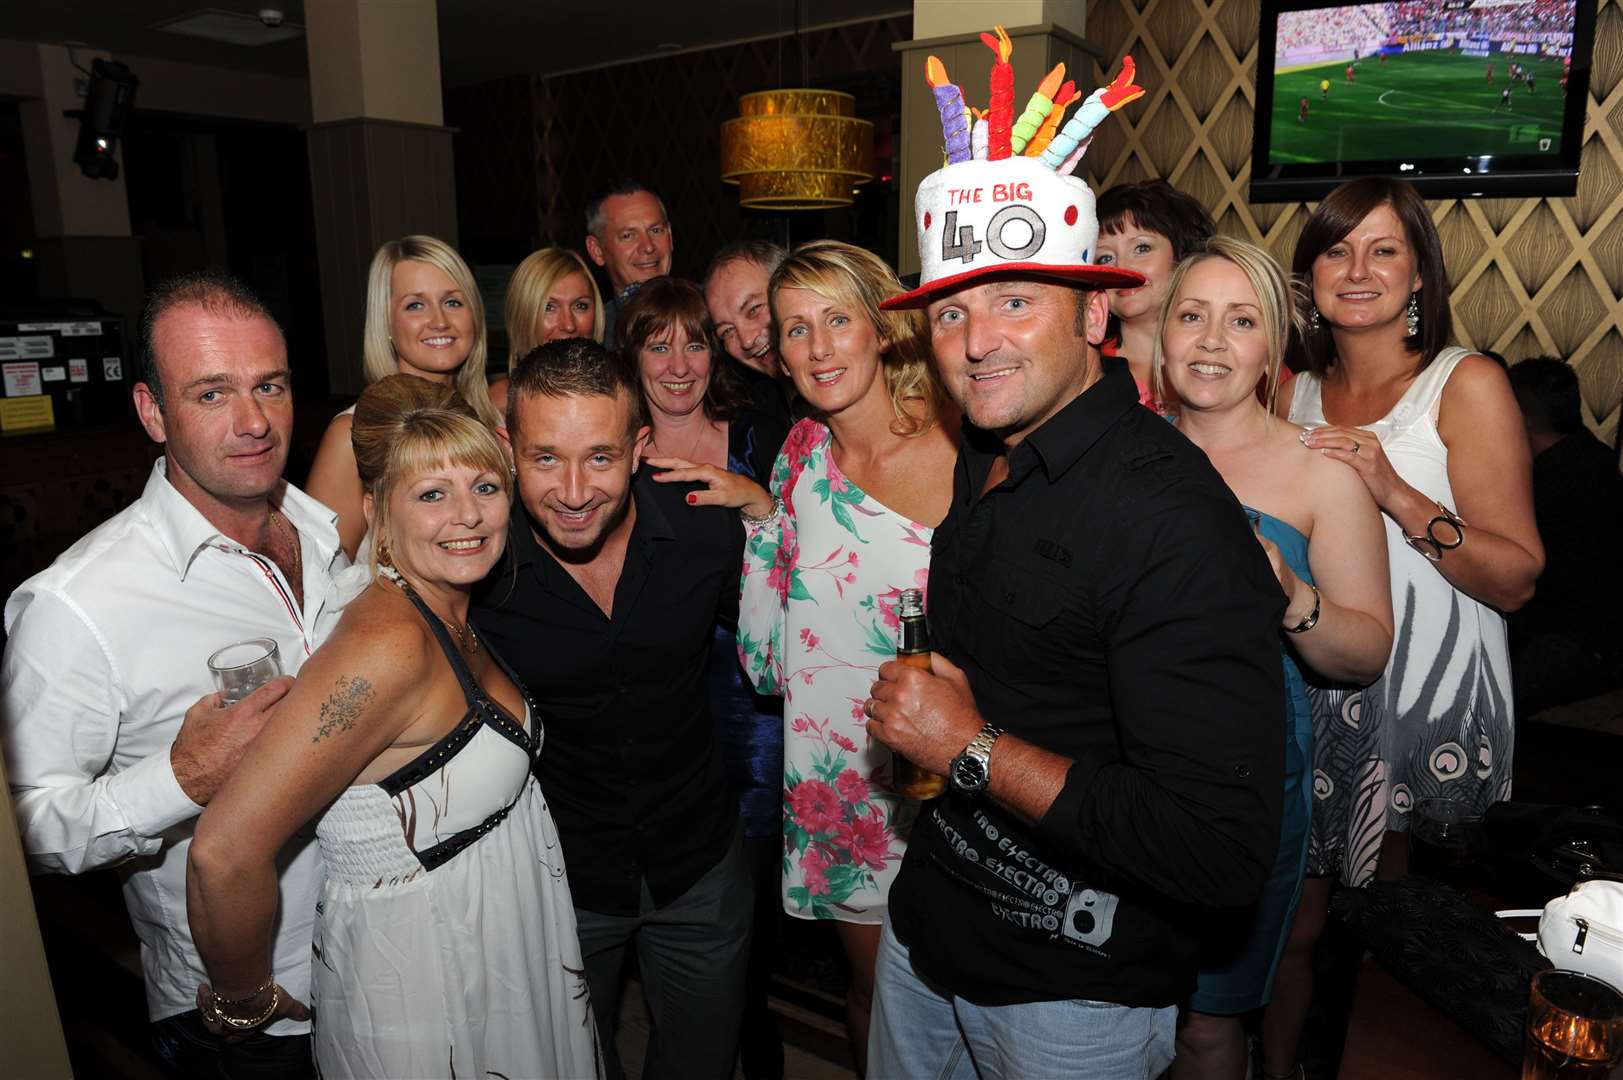 40th birthday bash for Willie Christie with friends and family at Smith n Jones